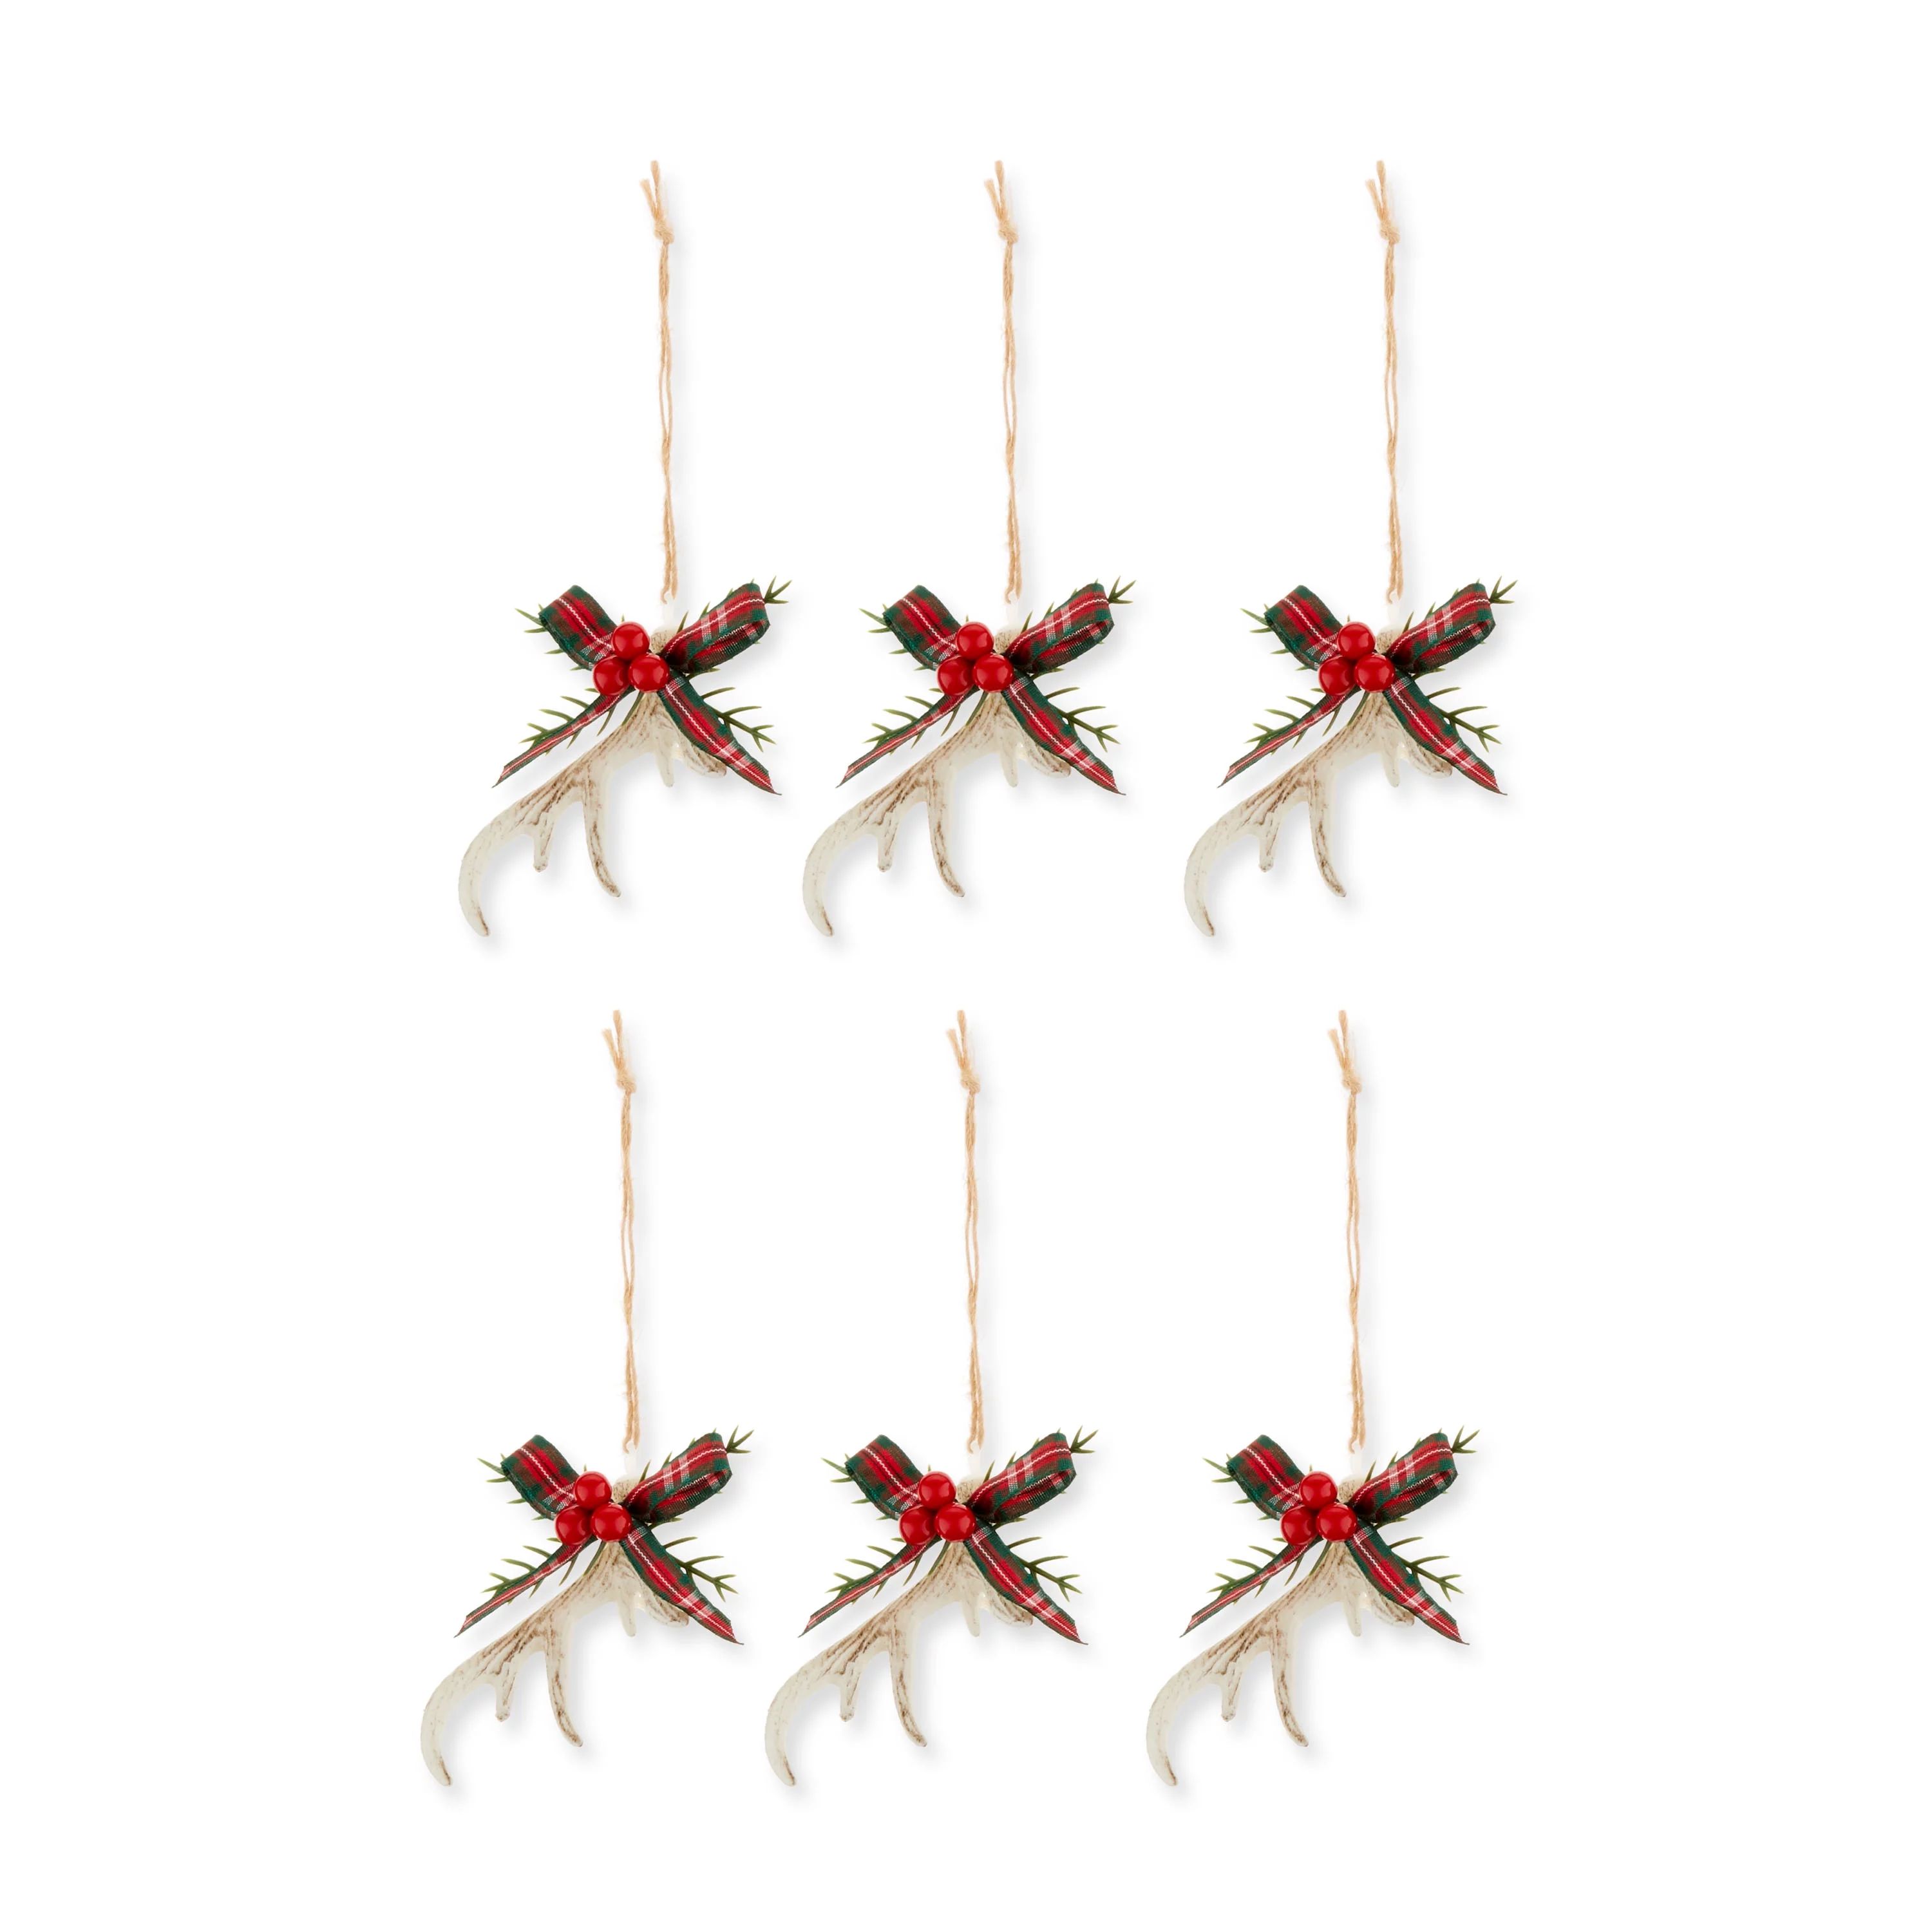 Mini Antique White Antler Christmas Ornaments, 0.5952 lb, 4 Count, by Holiday Time | Walmart (US)